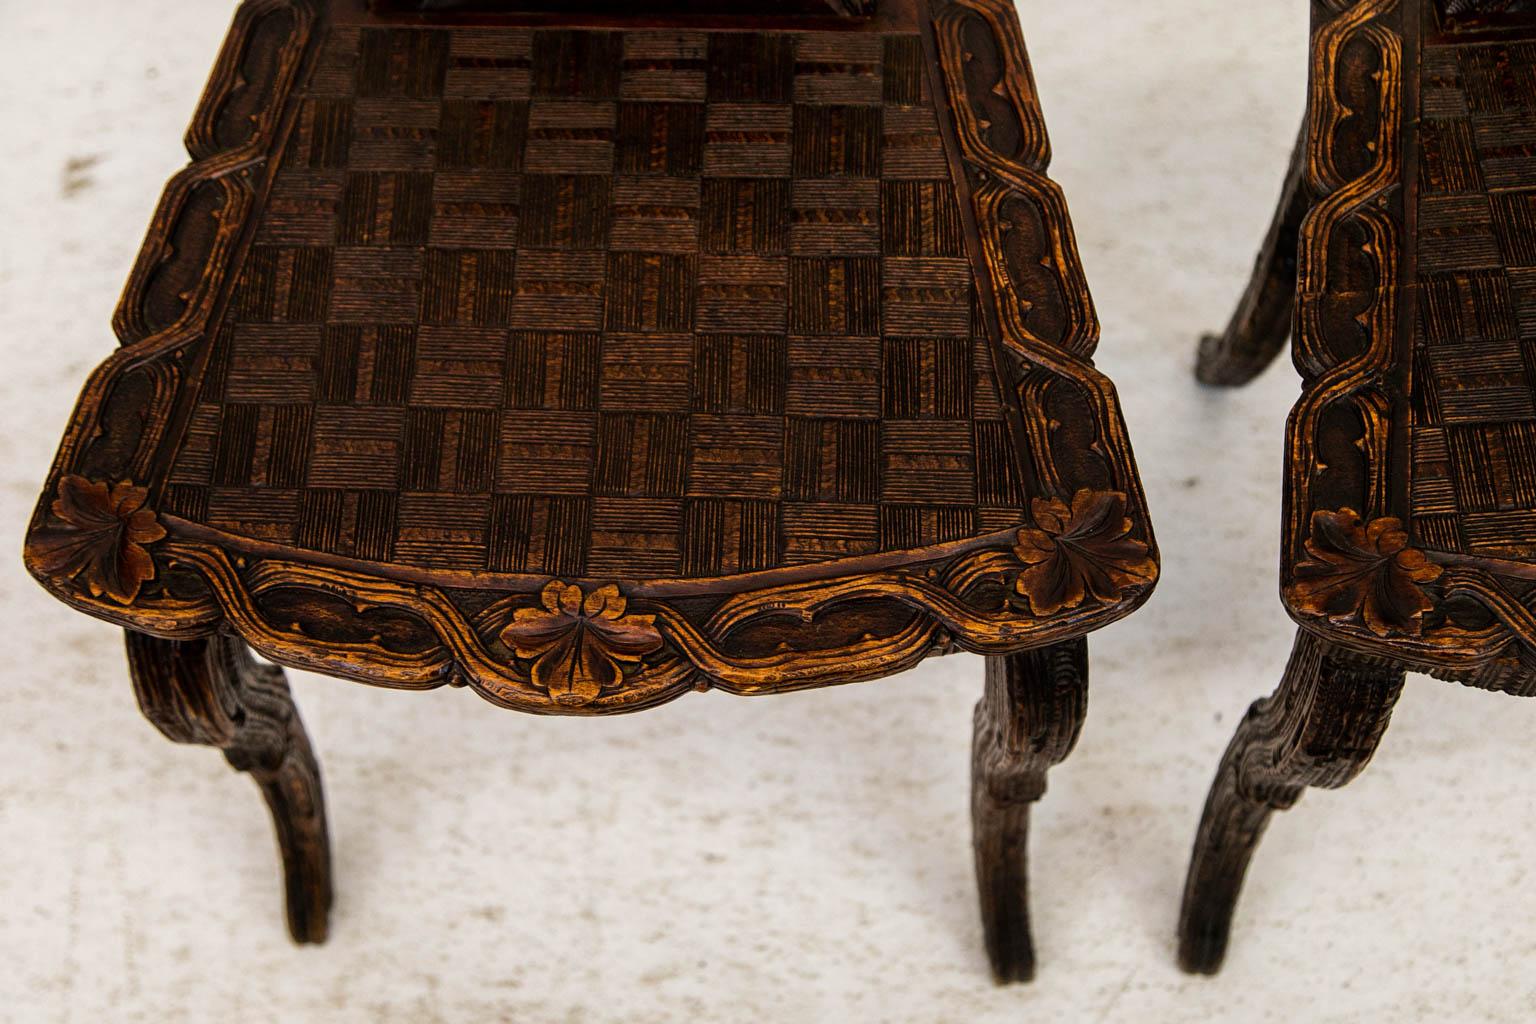 This pair of hall chairs are carved with floral and leaf motifs on a stipled background. The seat is carved with an incised square basketweave pattern which is framed on three sides with a carved interlaced vine. The legs are carved on all four